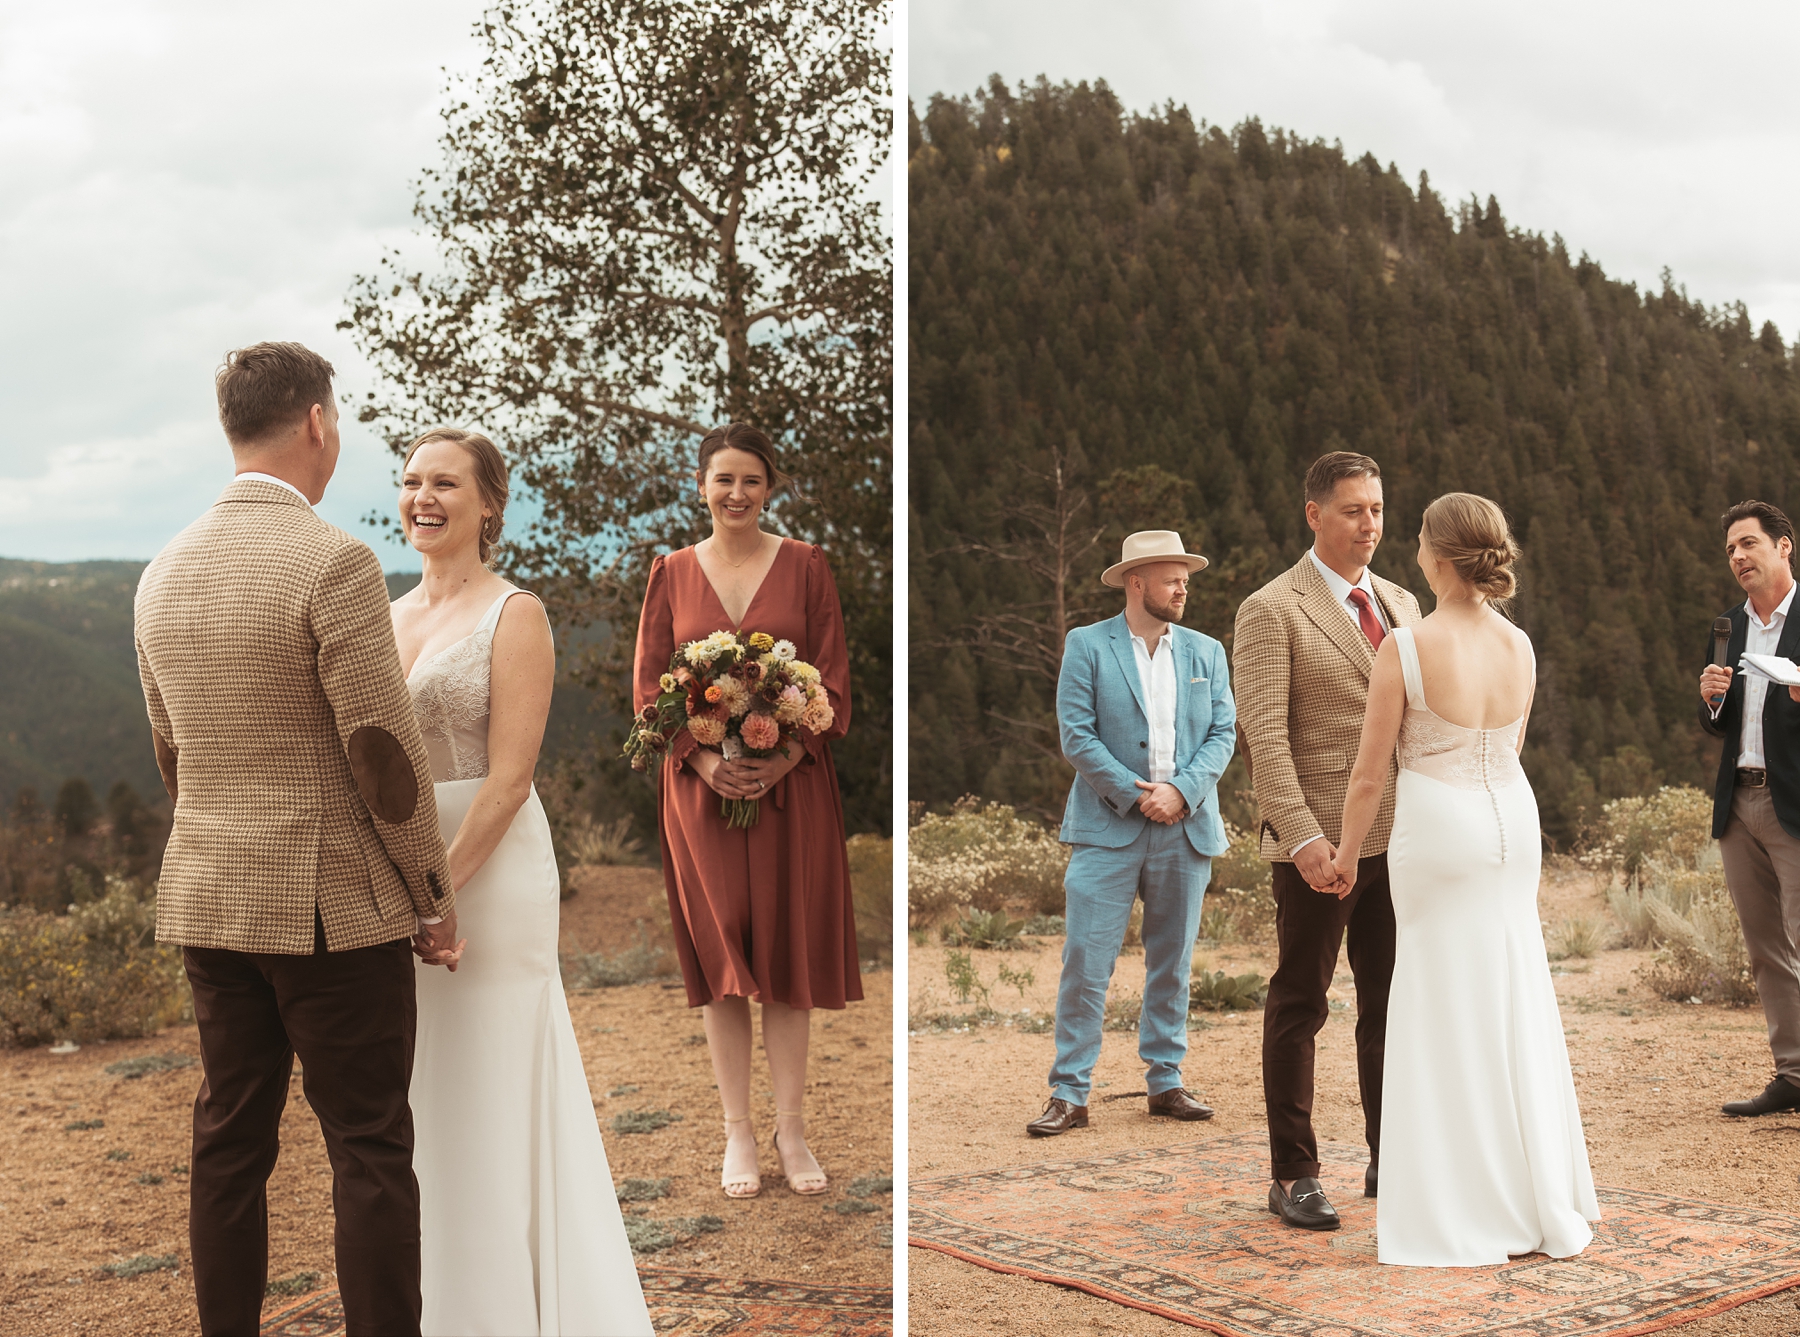 Bride and groom looking at each other during ceremony at Airbnb wedding venue in Colorado